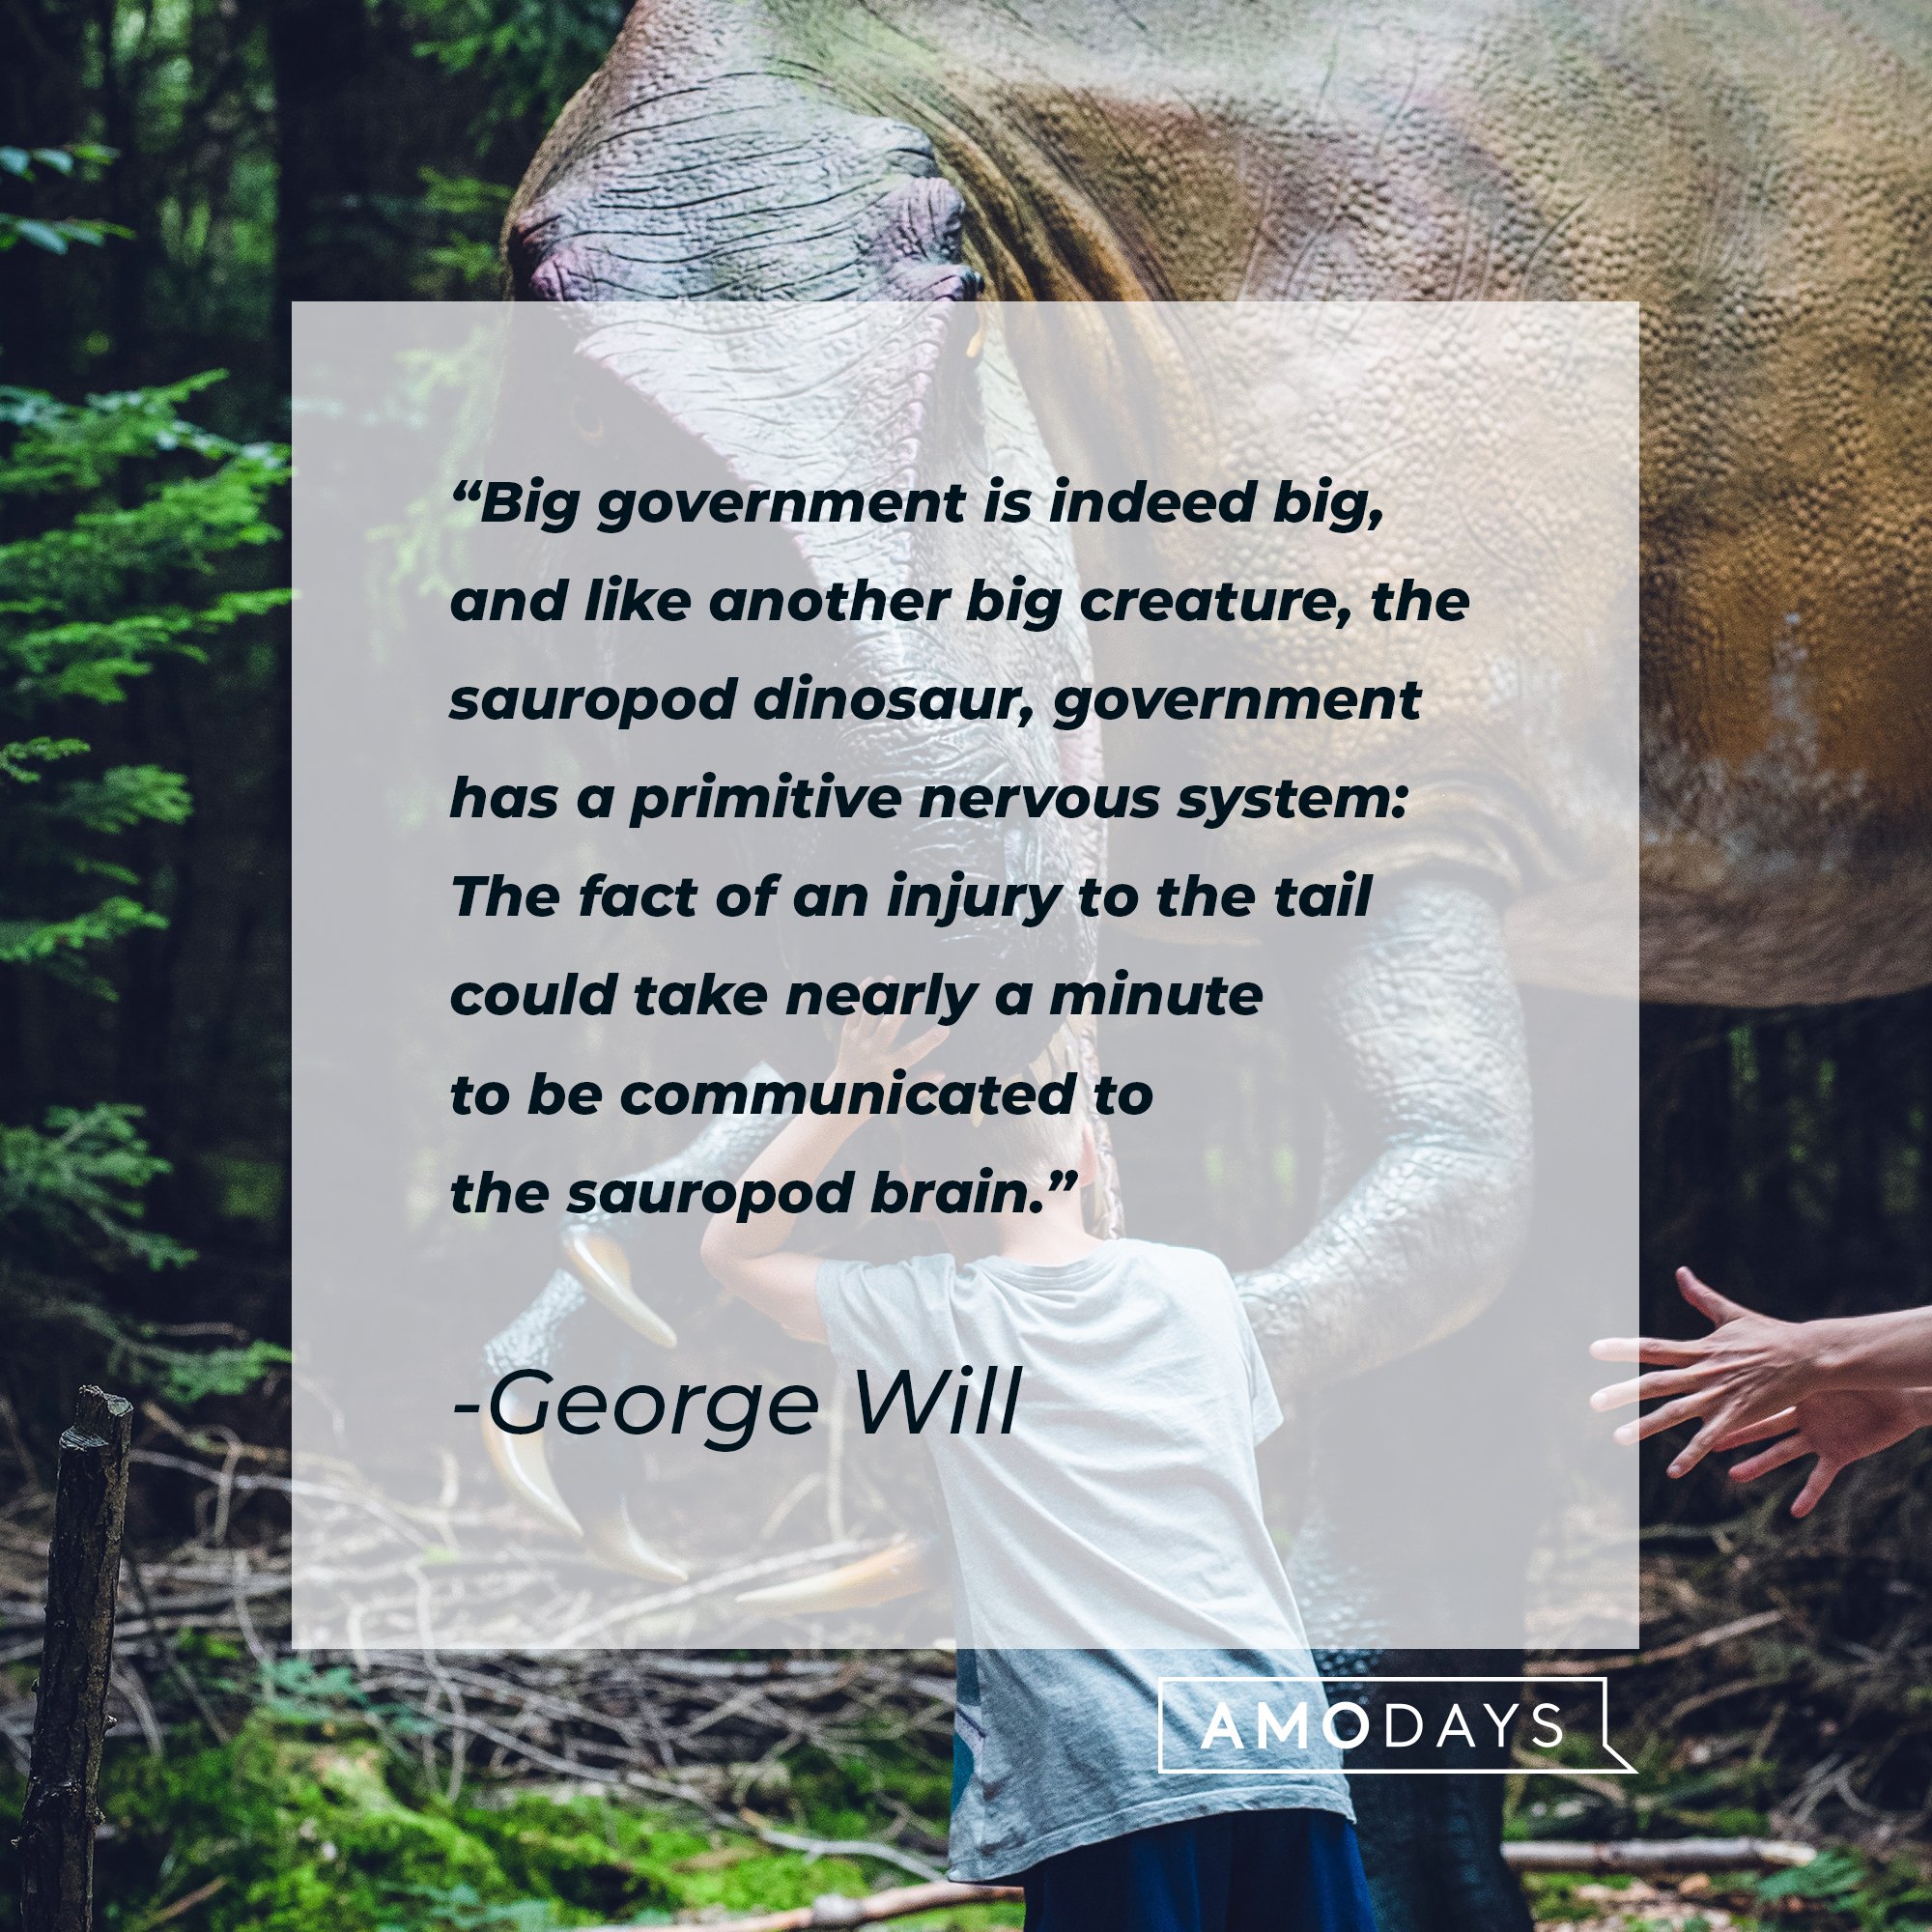 George Will’s quote: "Big government is indeed big, and like another big creature, the sauropod dinosaur, government has a primitive nervous system: The fact of an injury to the tail could take nearly a minute to be communicated to the sauropod brain." | Image: AmoDays